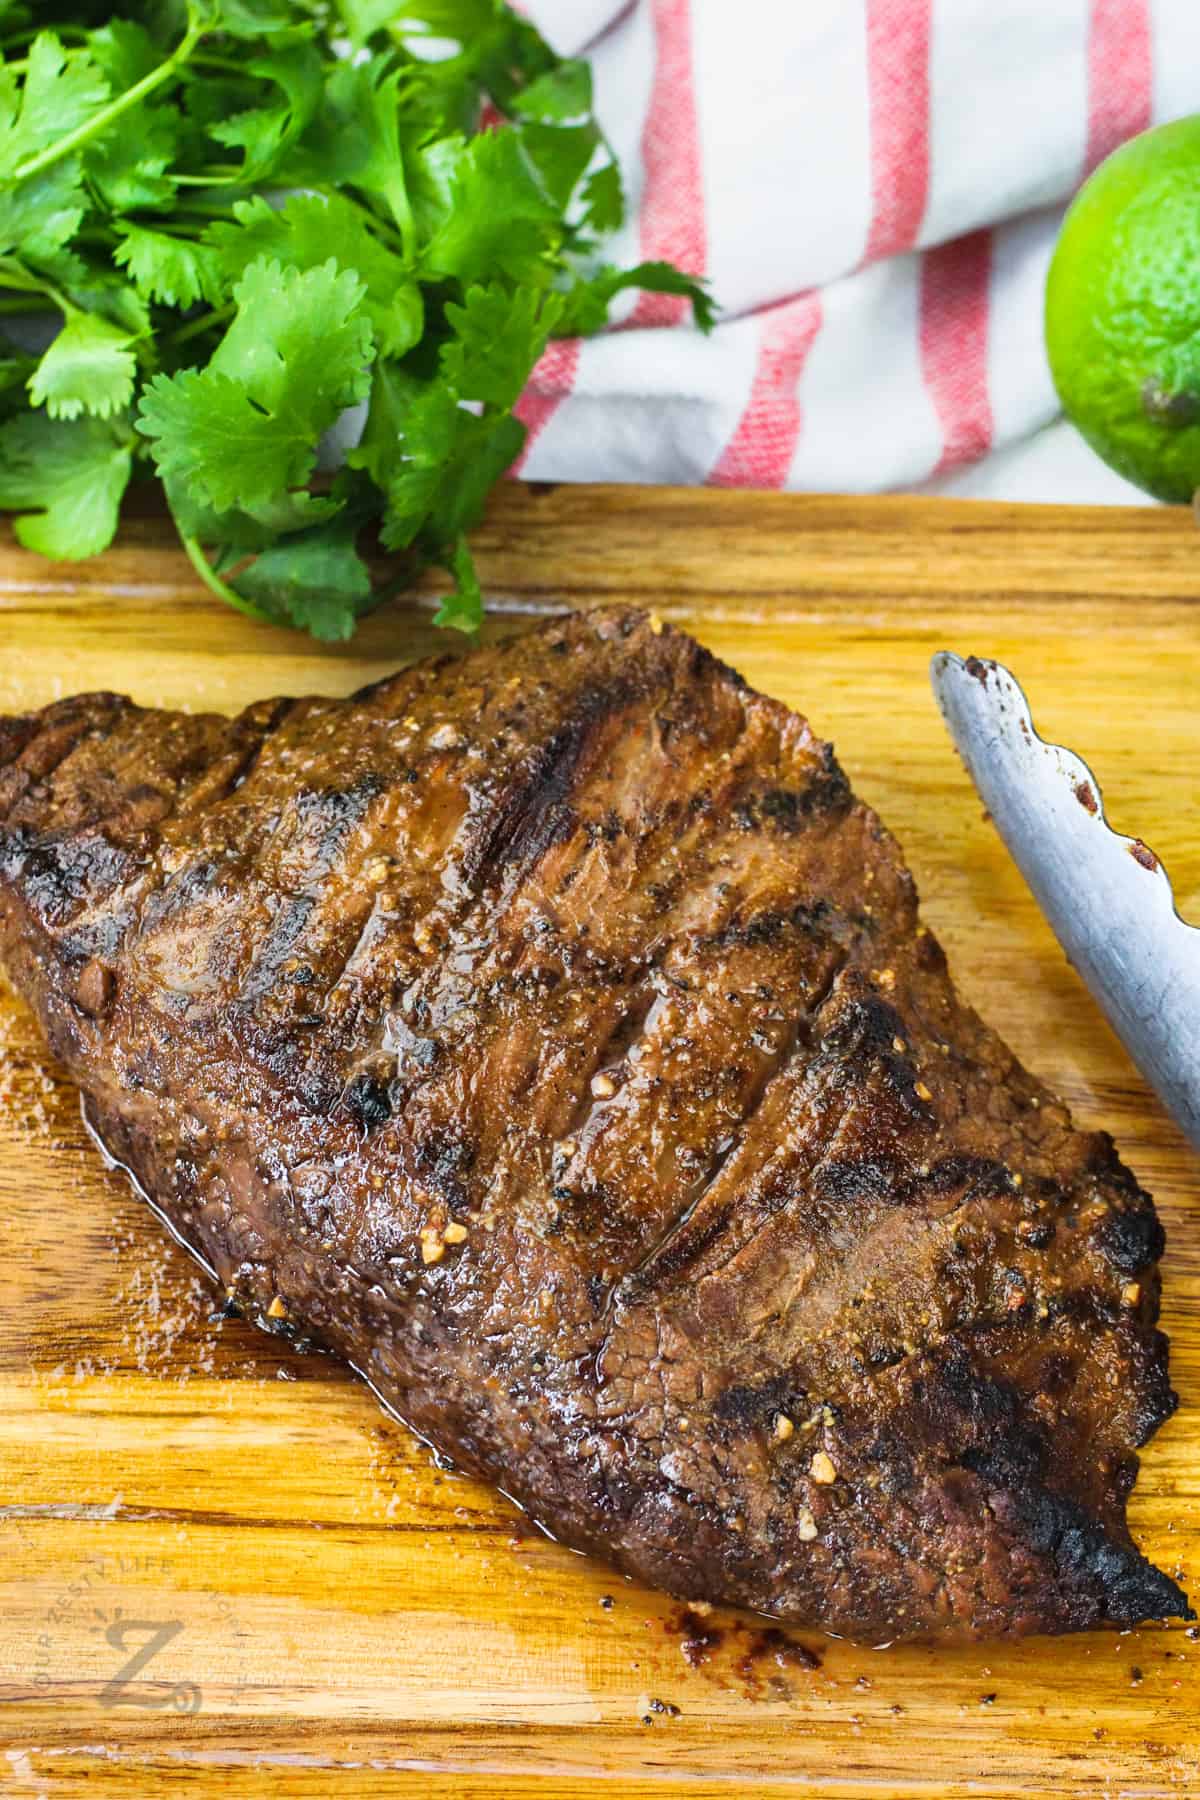 grilled flank steak resting on a wooden board